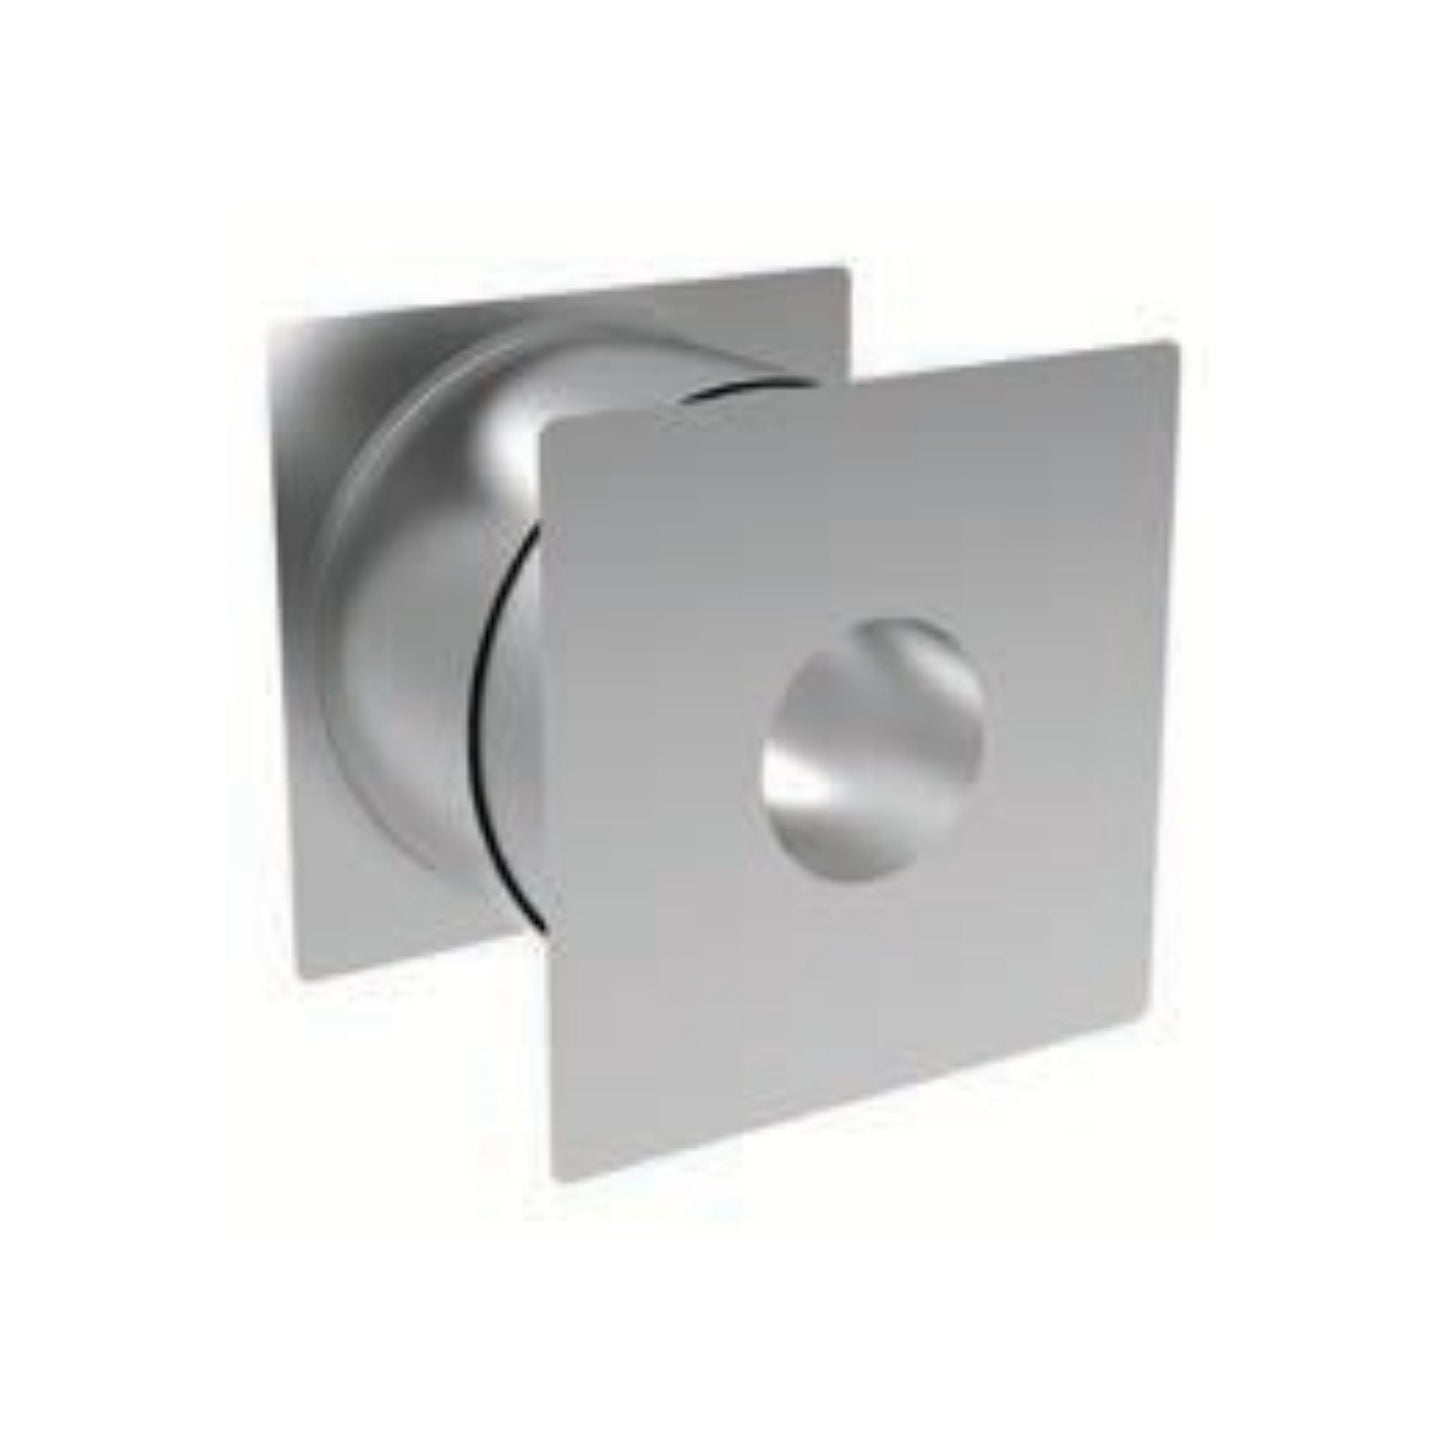 DuraVent FasNSeal 8" 29-4C Stainless Steel Insulated Wall Pass Through